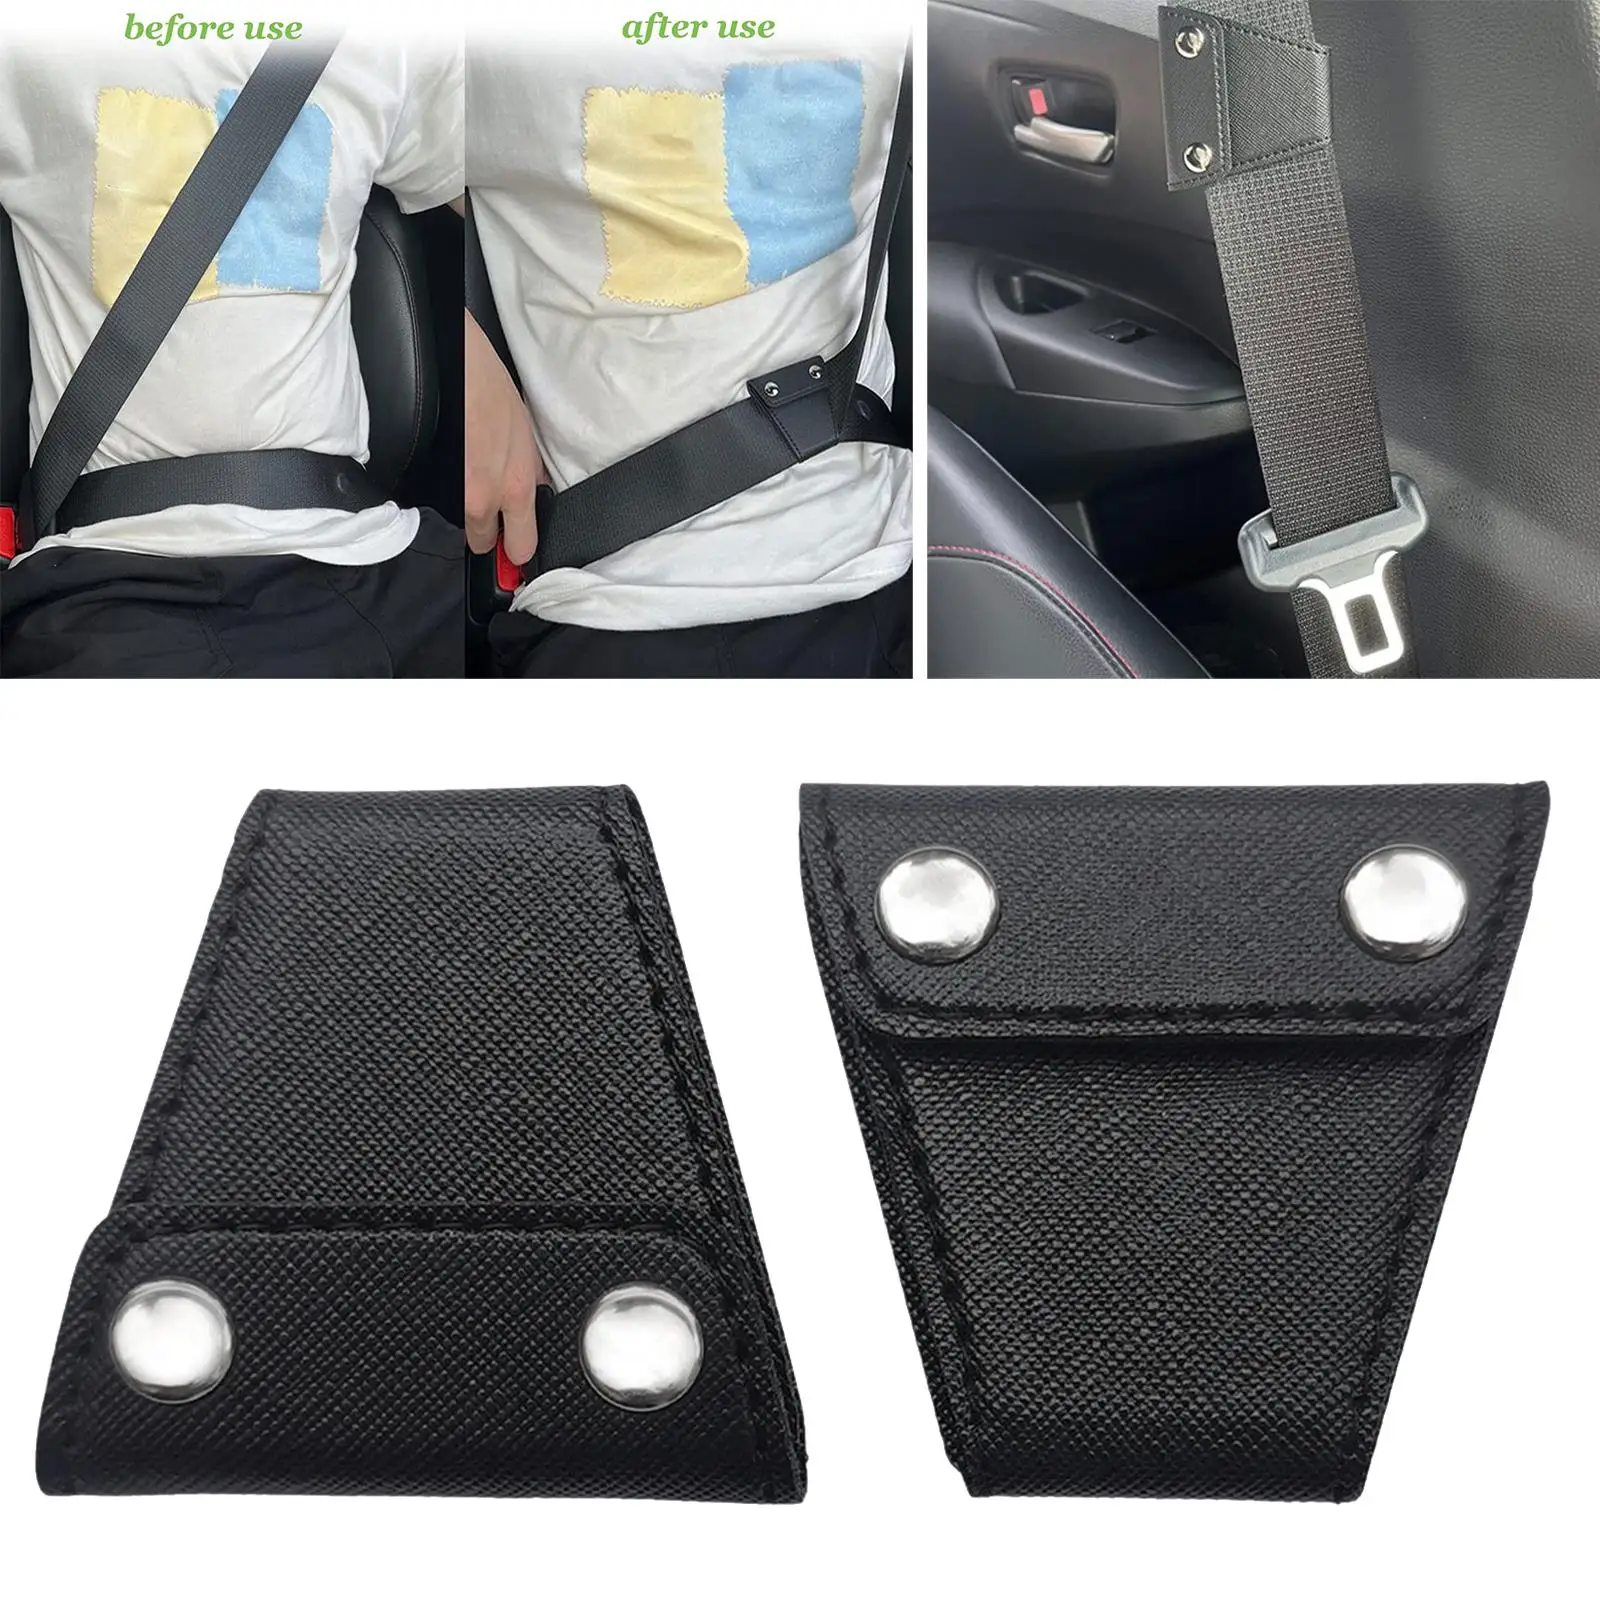 2x seat Adjuster Comfort Universal Protective Safety Strap Adjuster Pad Protects from Cut Your Neck or Rubbing Your Chest